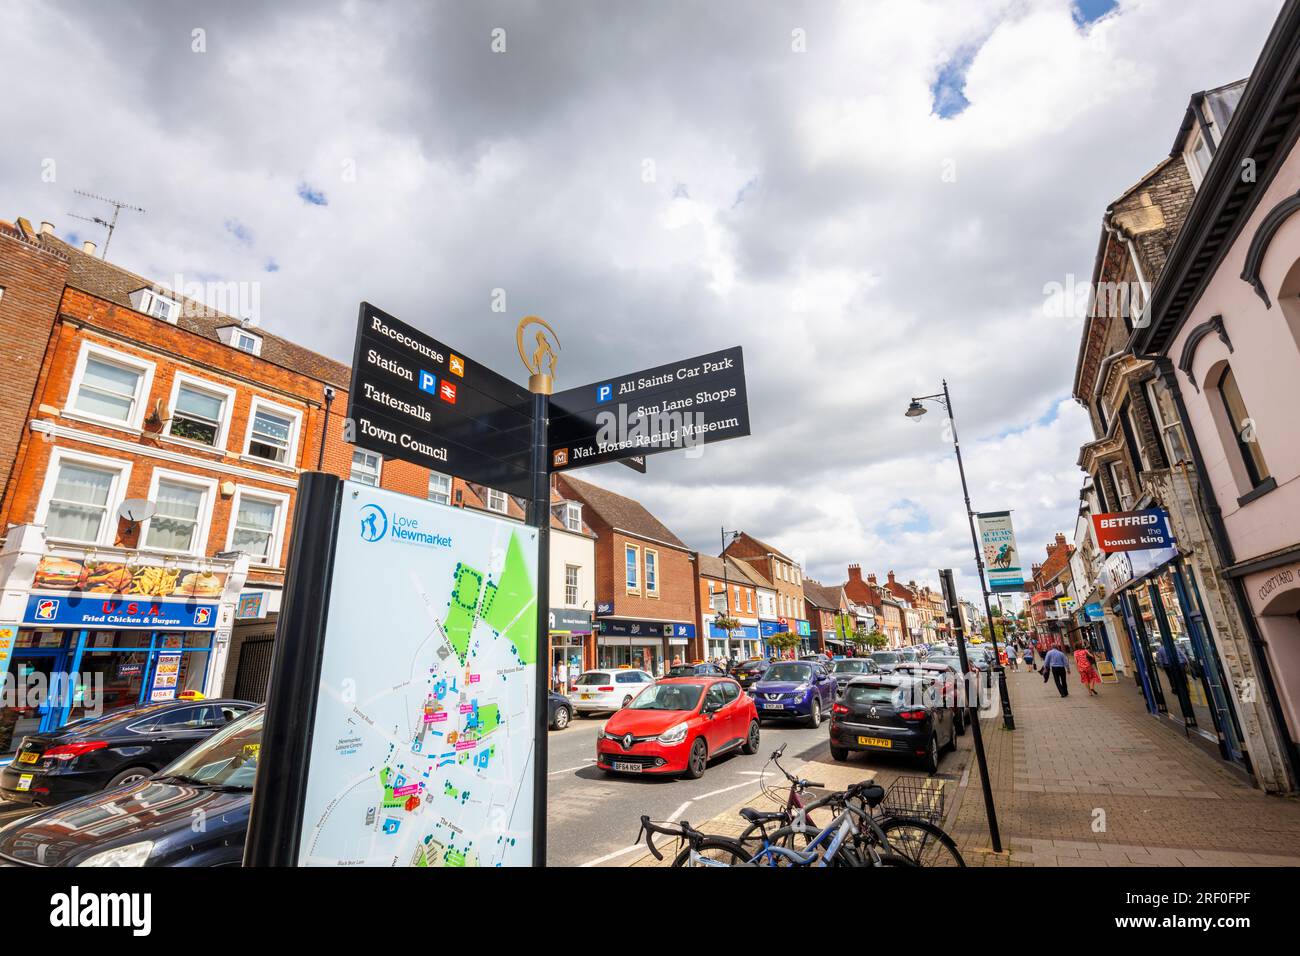 Street sign pointing to local points on interest in the town centre of Newmarket, a market town in the West Suffolk district of Suffolk, east England Stock Photo